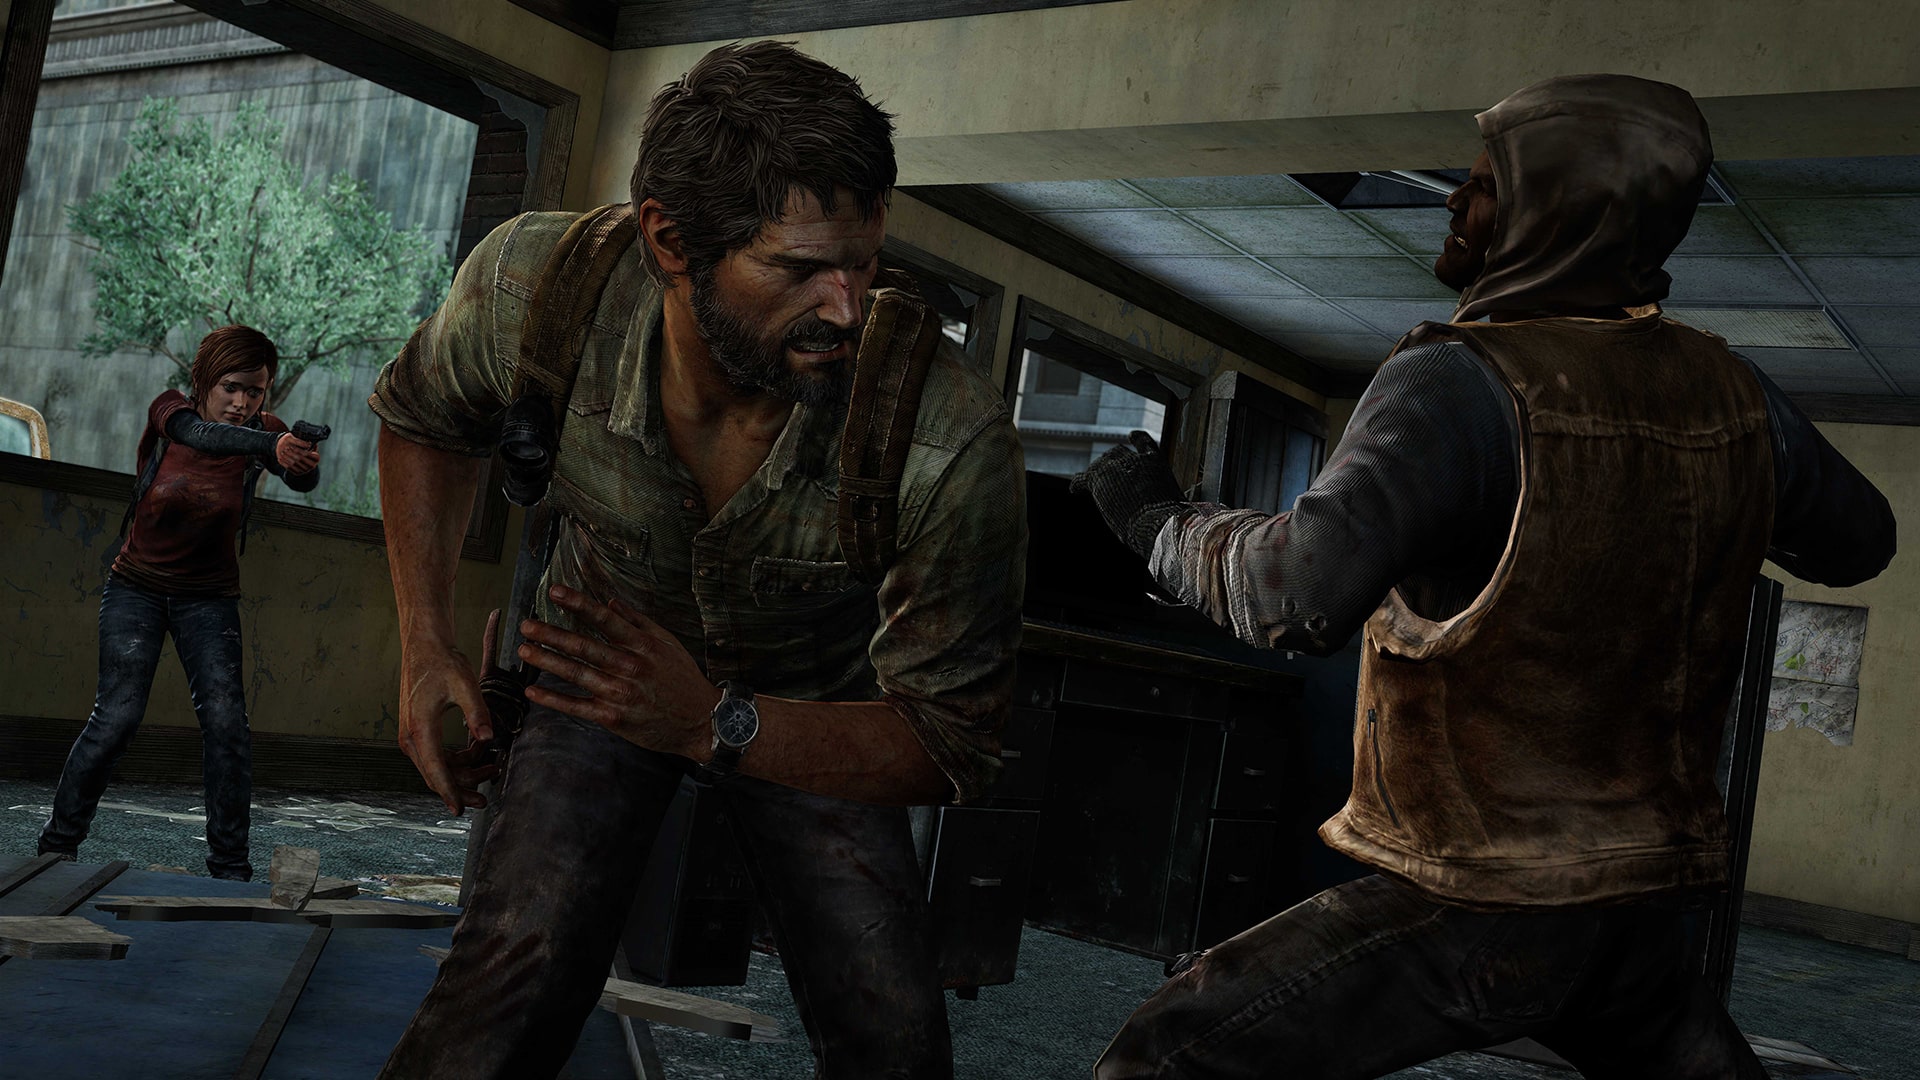 the last of us remastered price playstation store